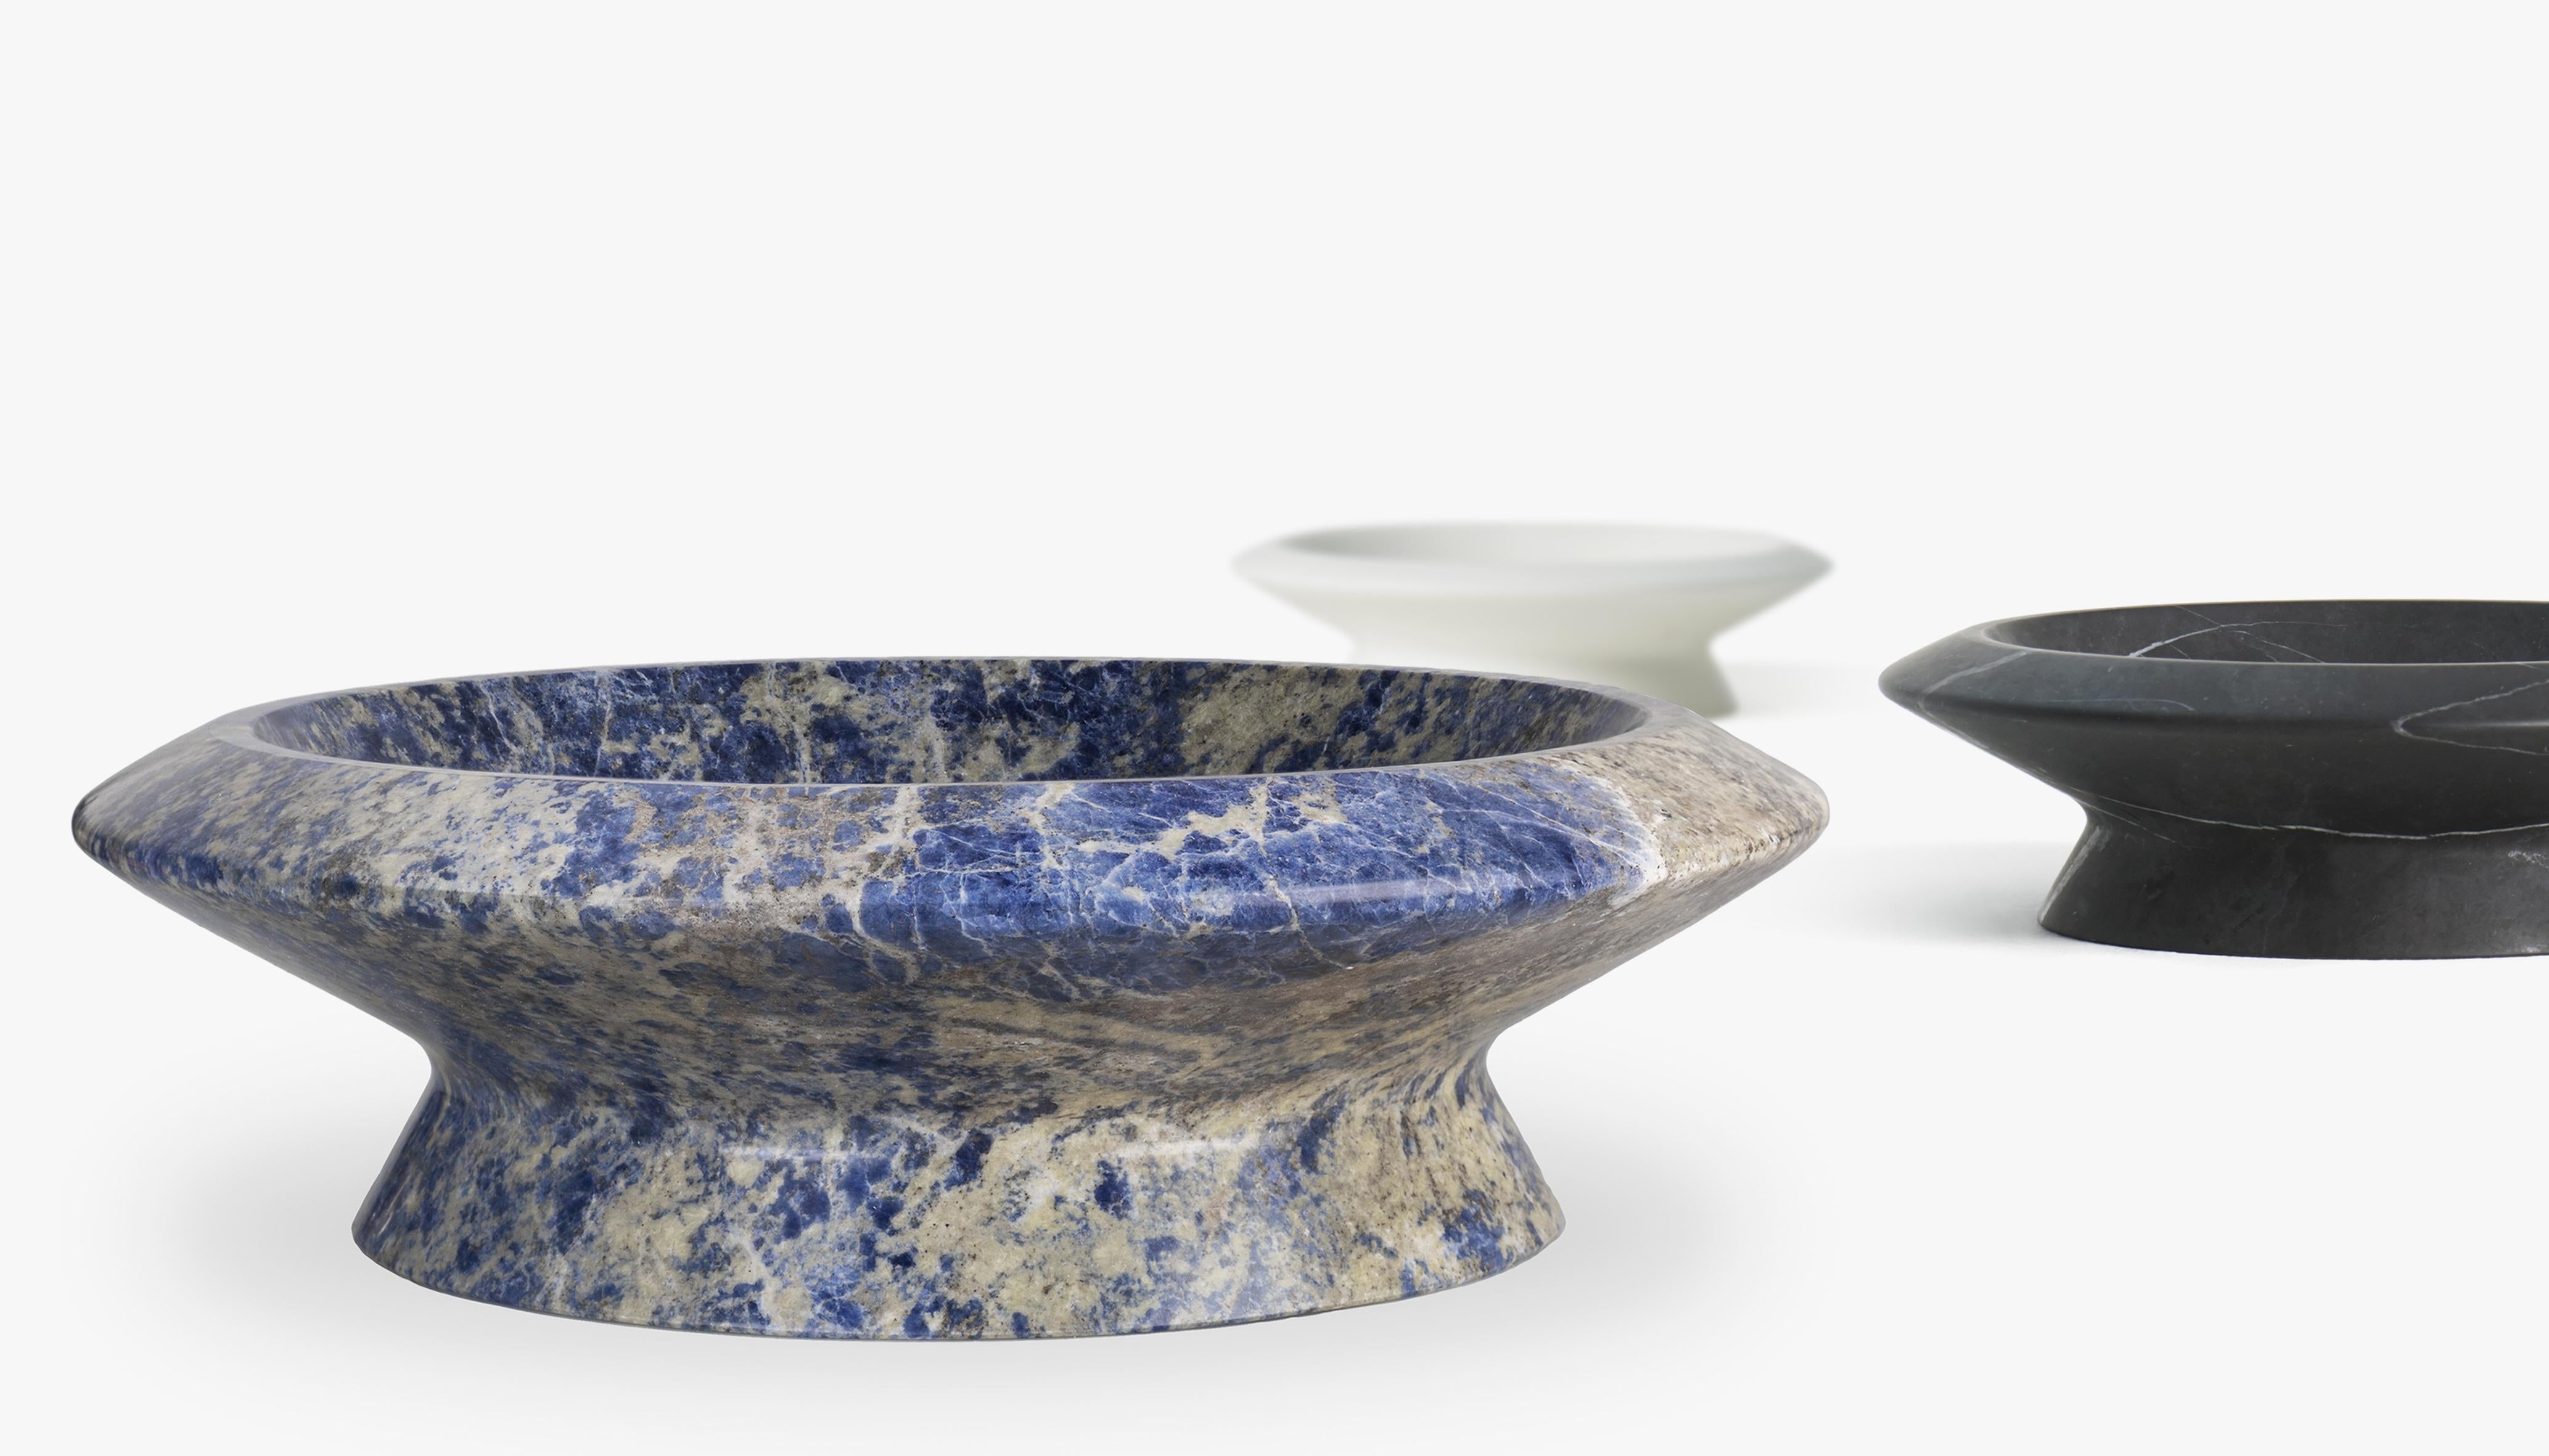 Centrepiece in Blue Sodalite marble, designed by Ivan Colominas - available in other marble colours.

Mmairo loves wining and dining, good food and entertaining and, it loves marble. In the kitchen it is the perfect material: pure, smooth and easy